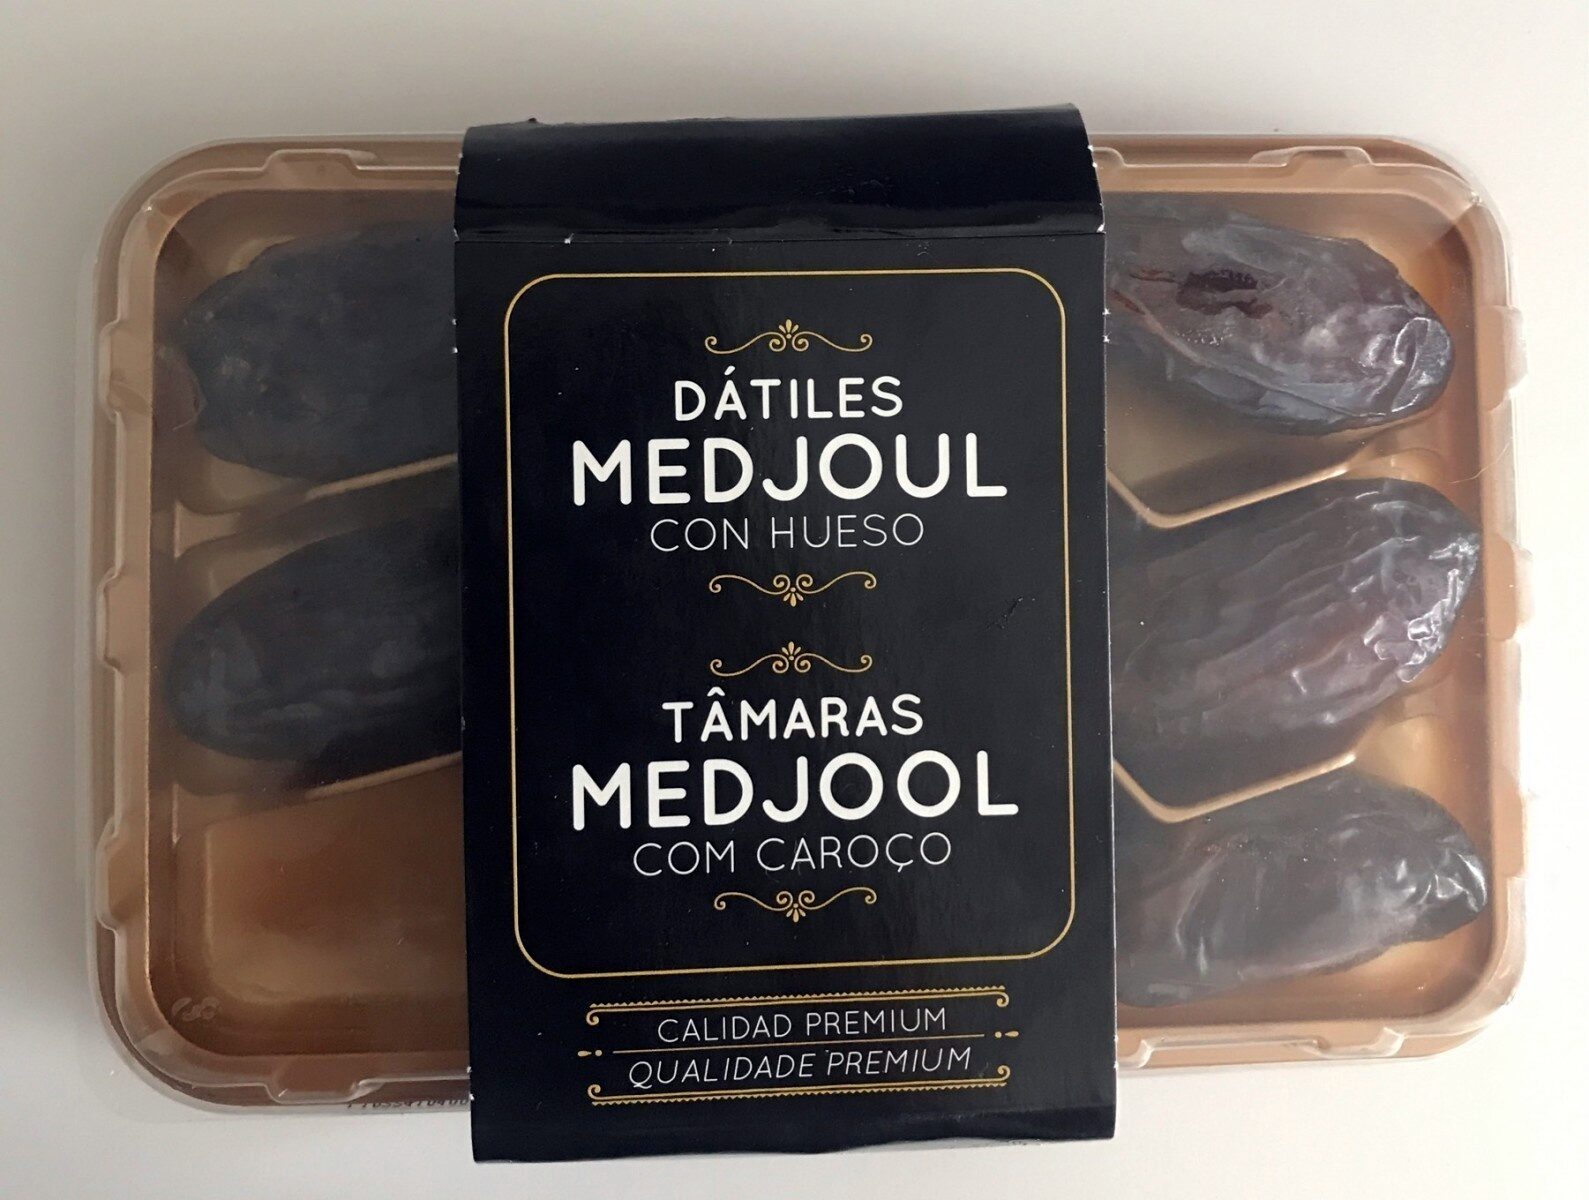 Dátiles Medjoul con hueso - Product - es